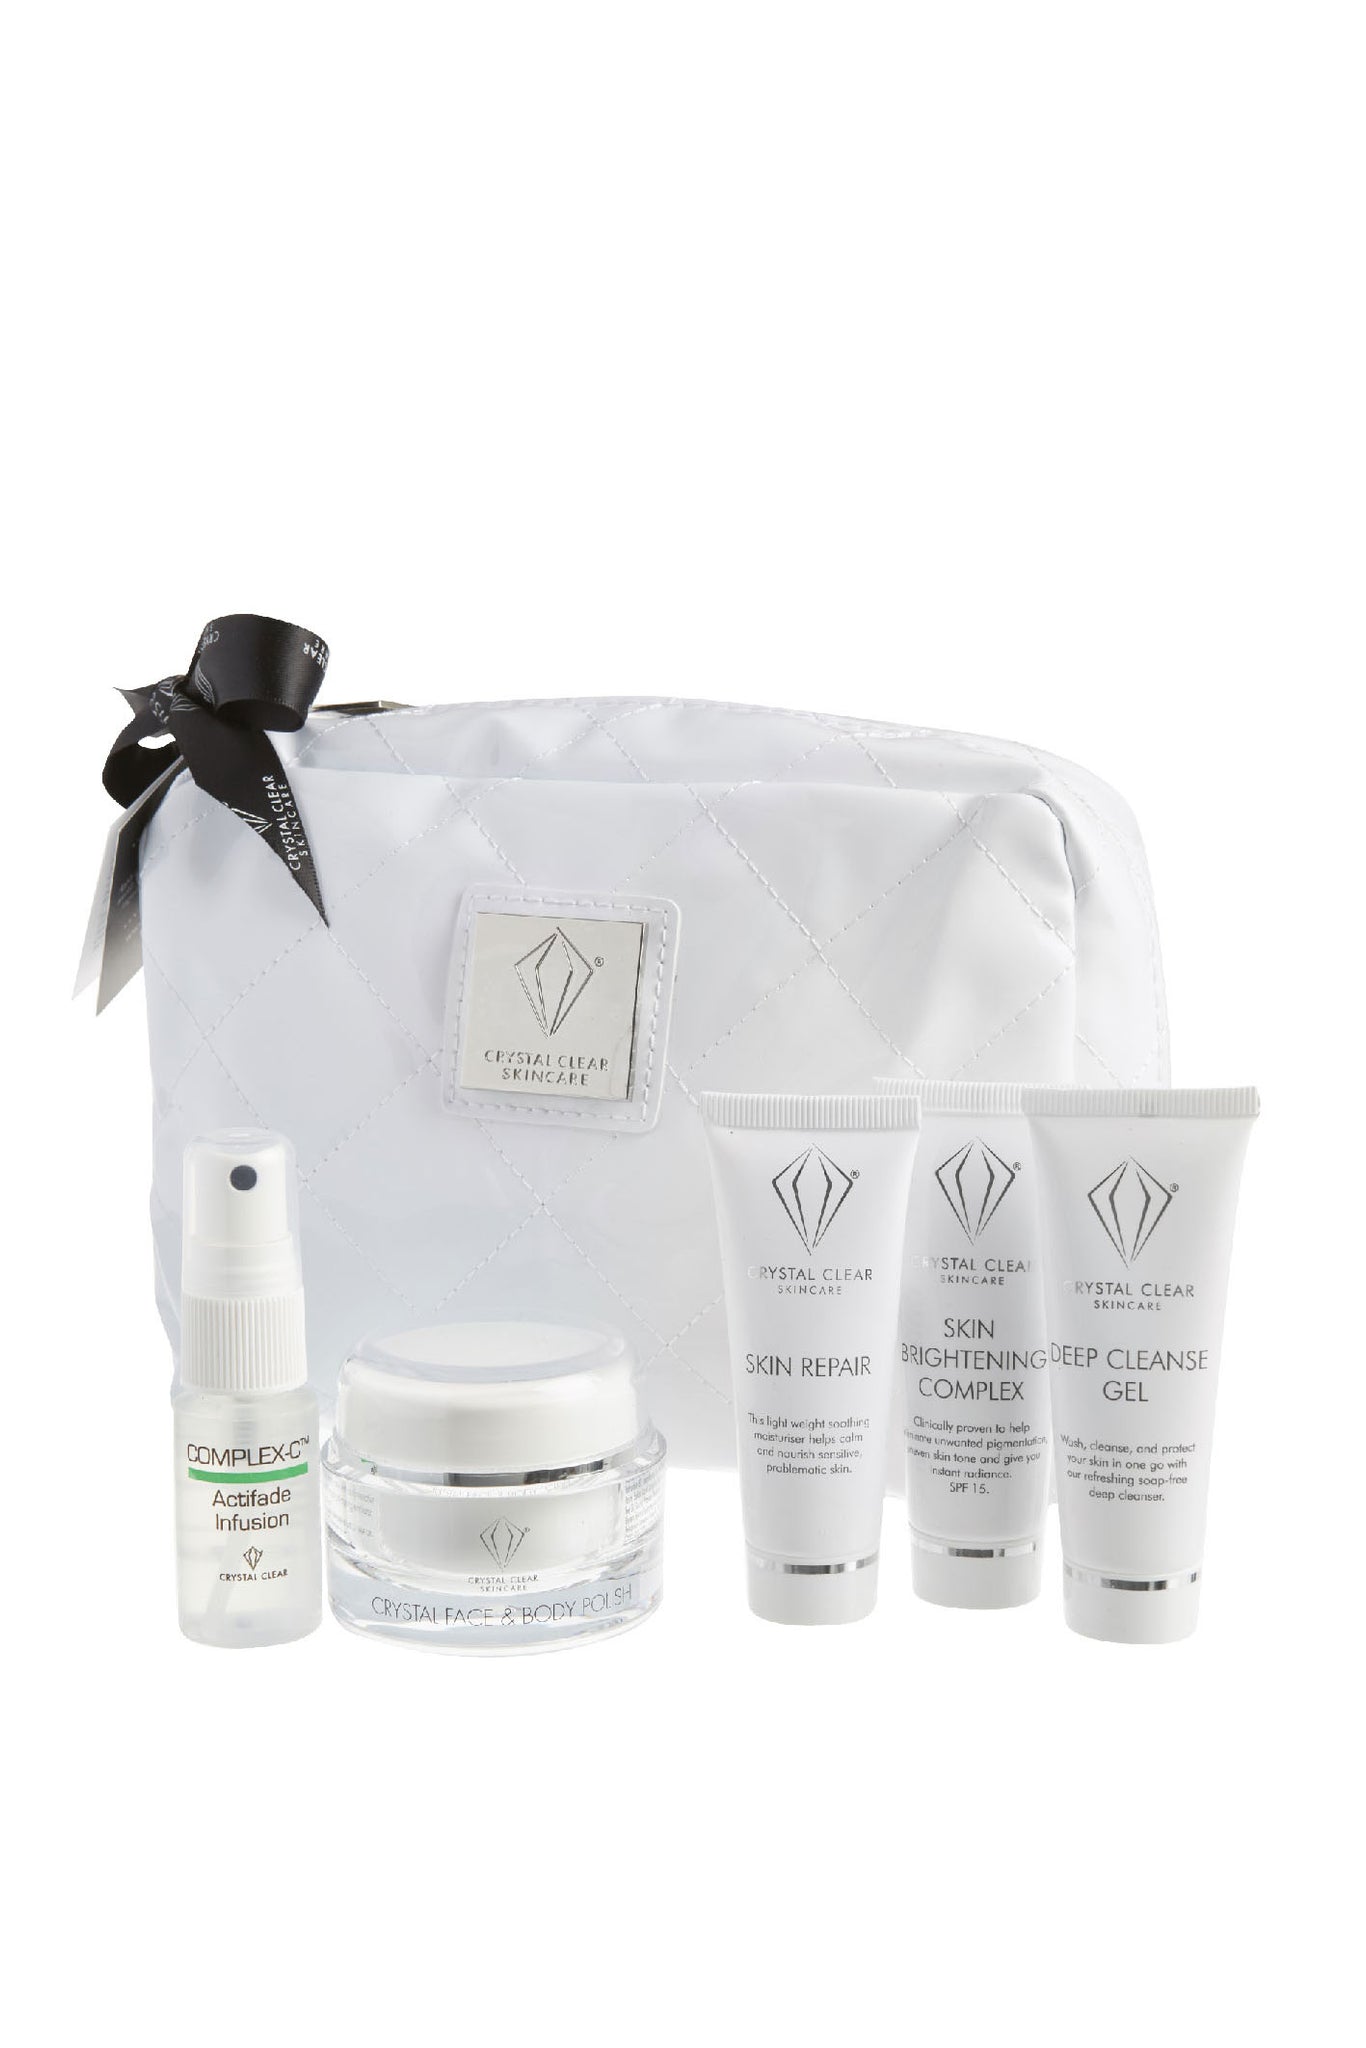 Crystal Clear Clear Complexion Gift Set